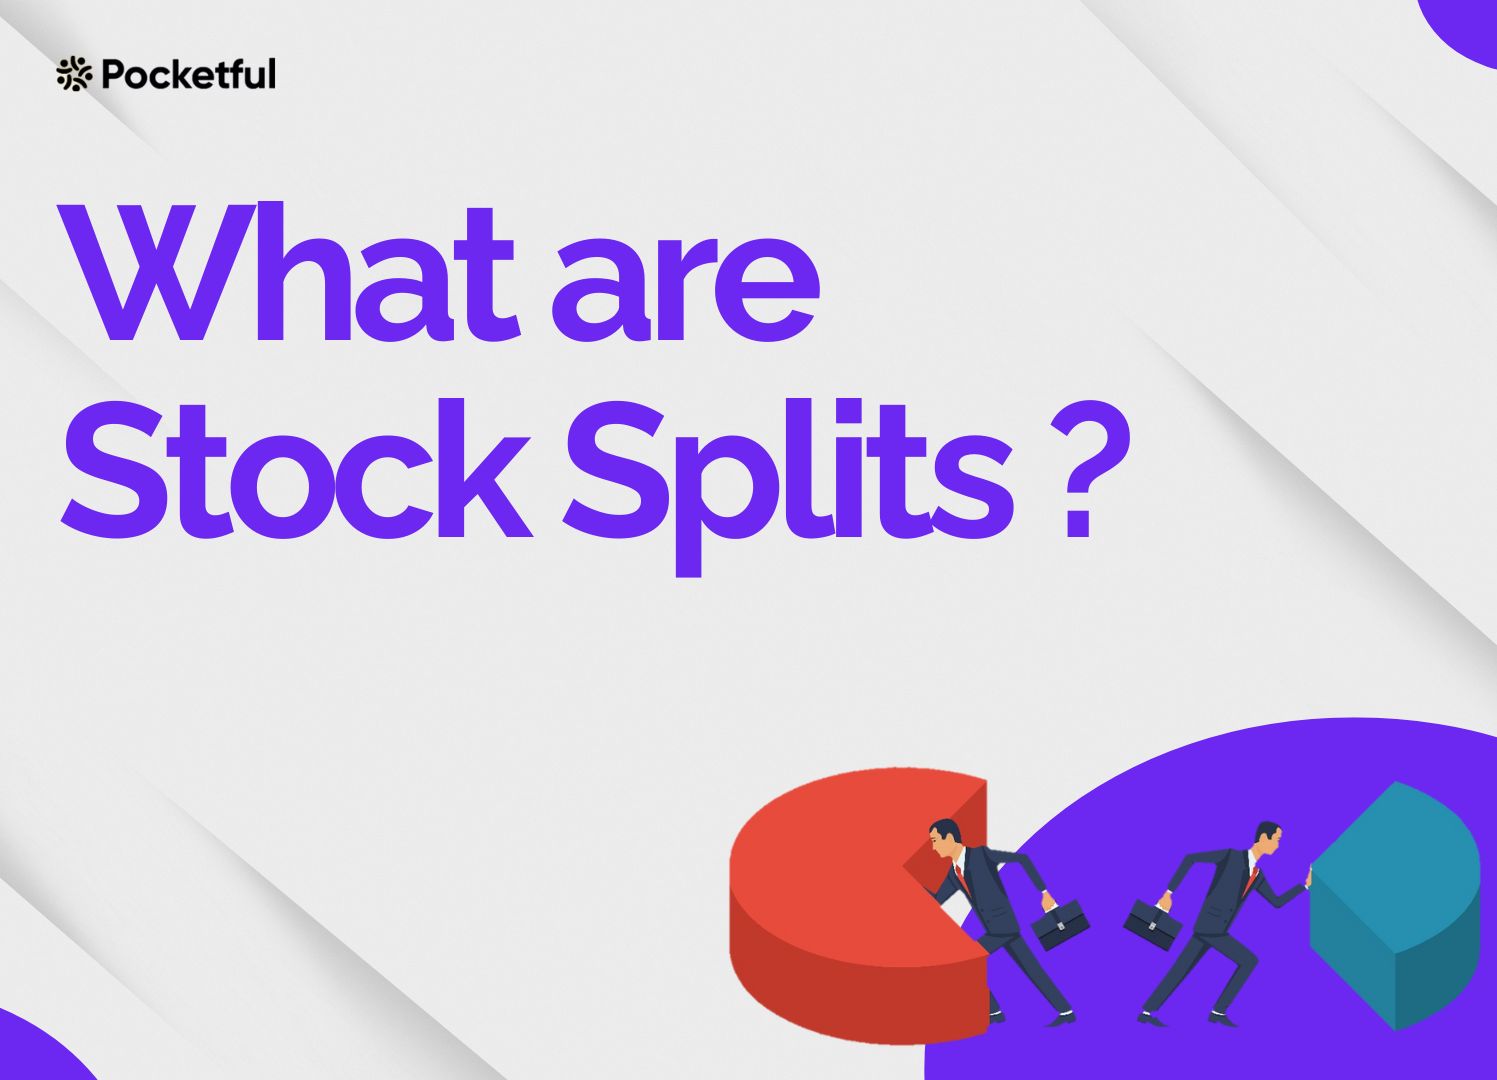 What are Stock Splits? Meaning, Reason, Types, and Impact Explained